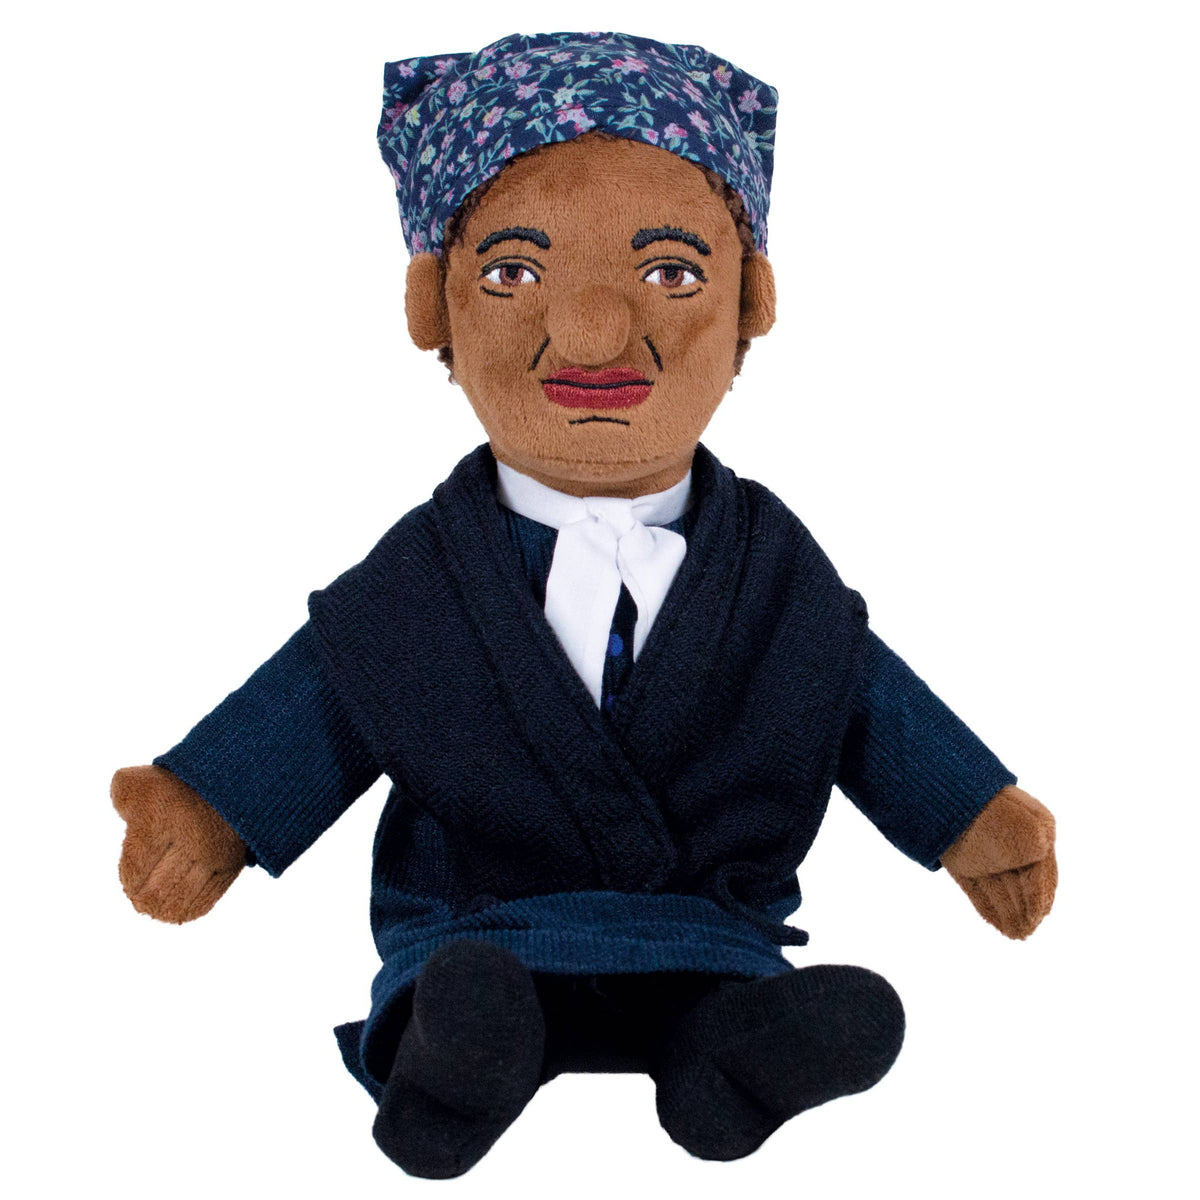 Front view of the Harriet Tubman doll against a white background.